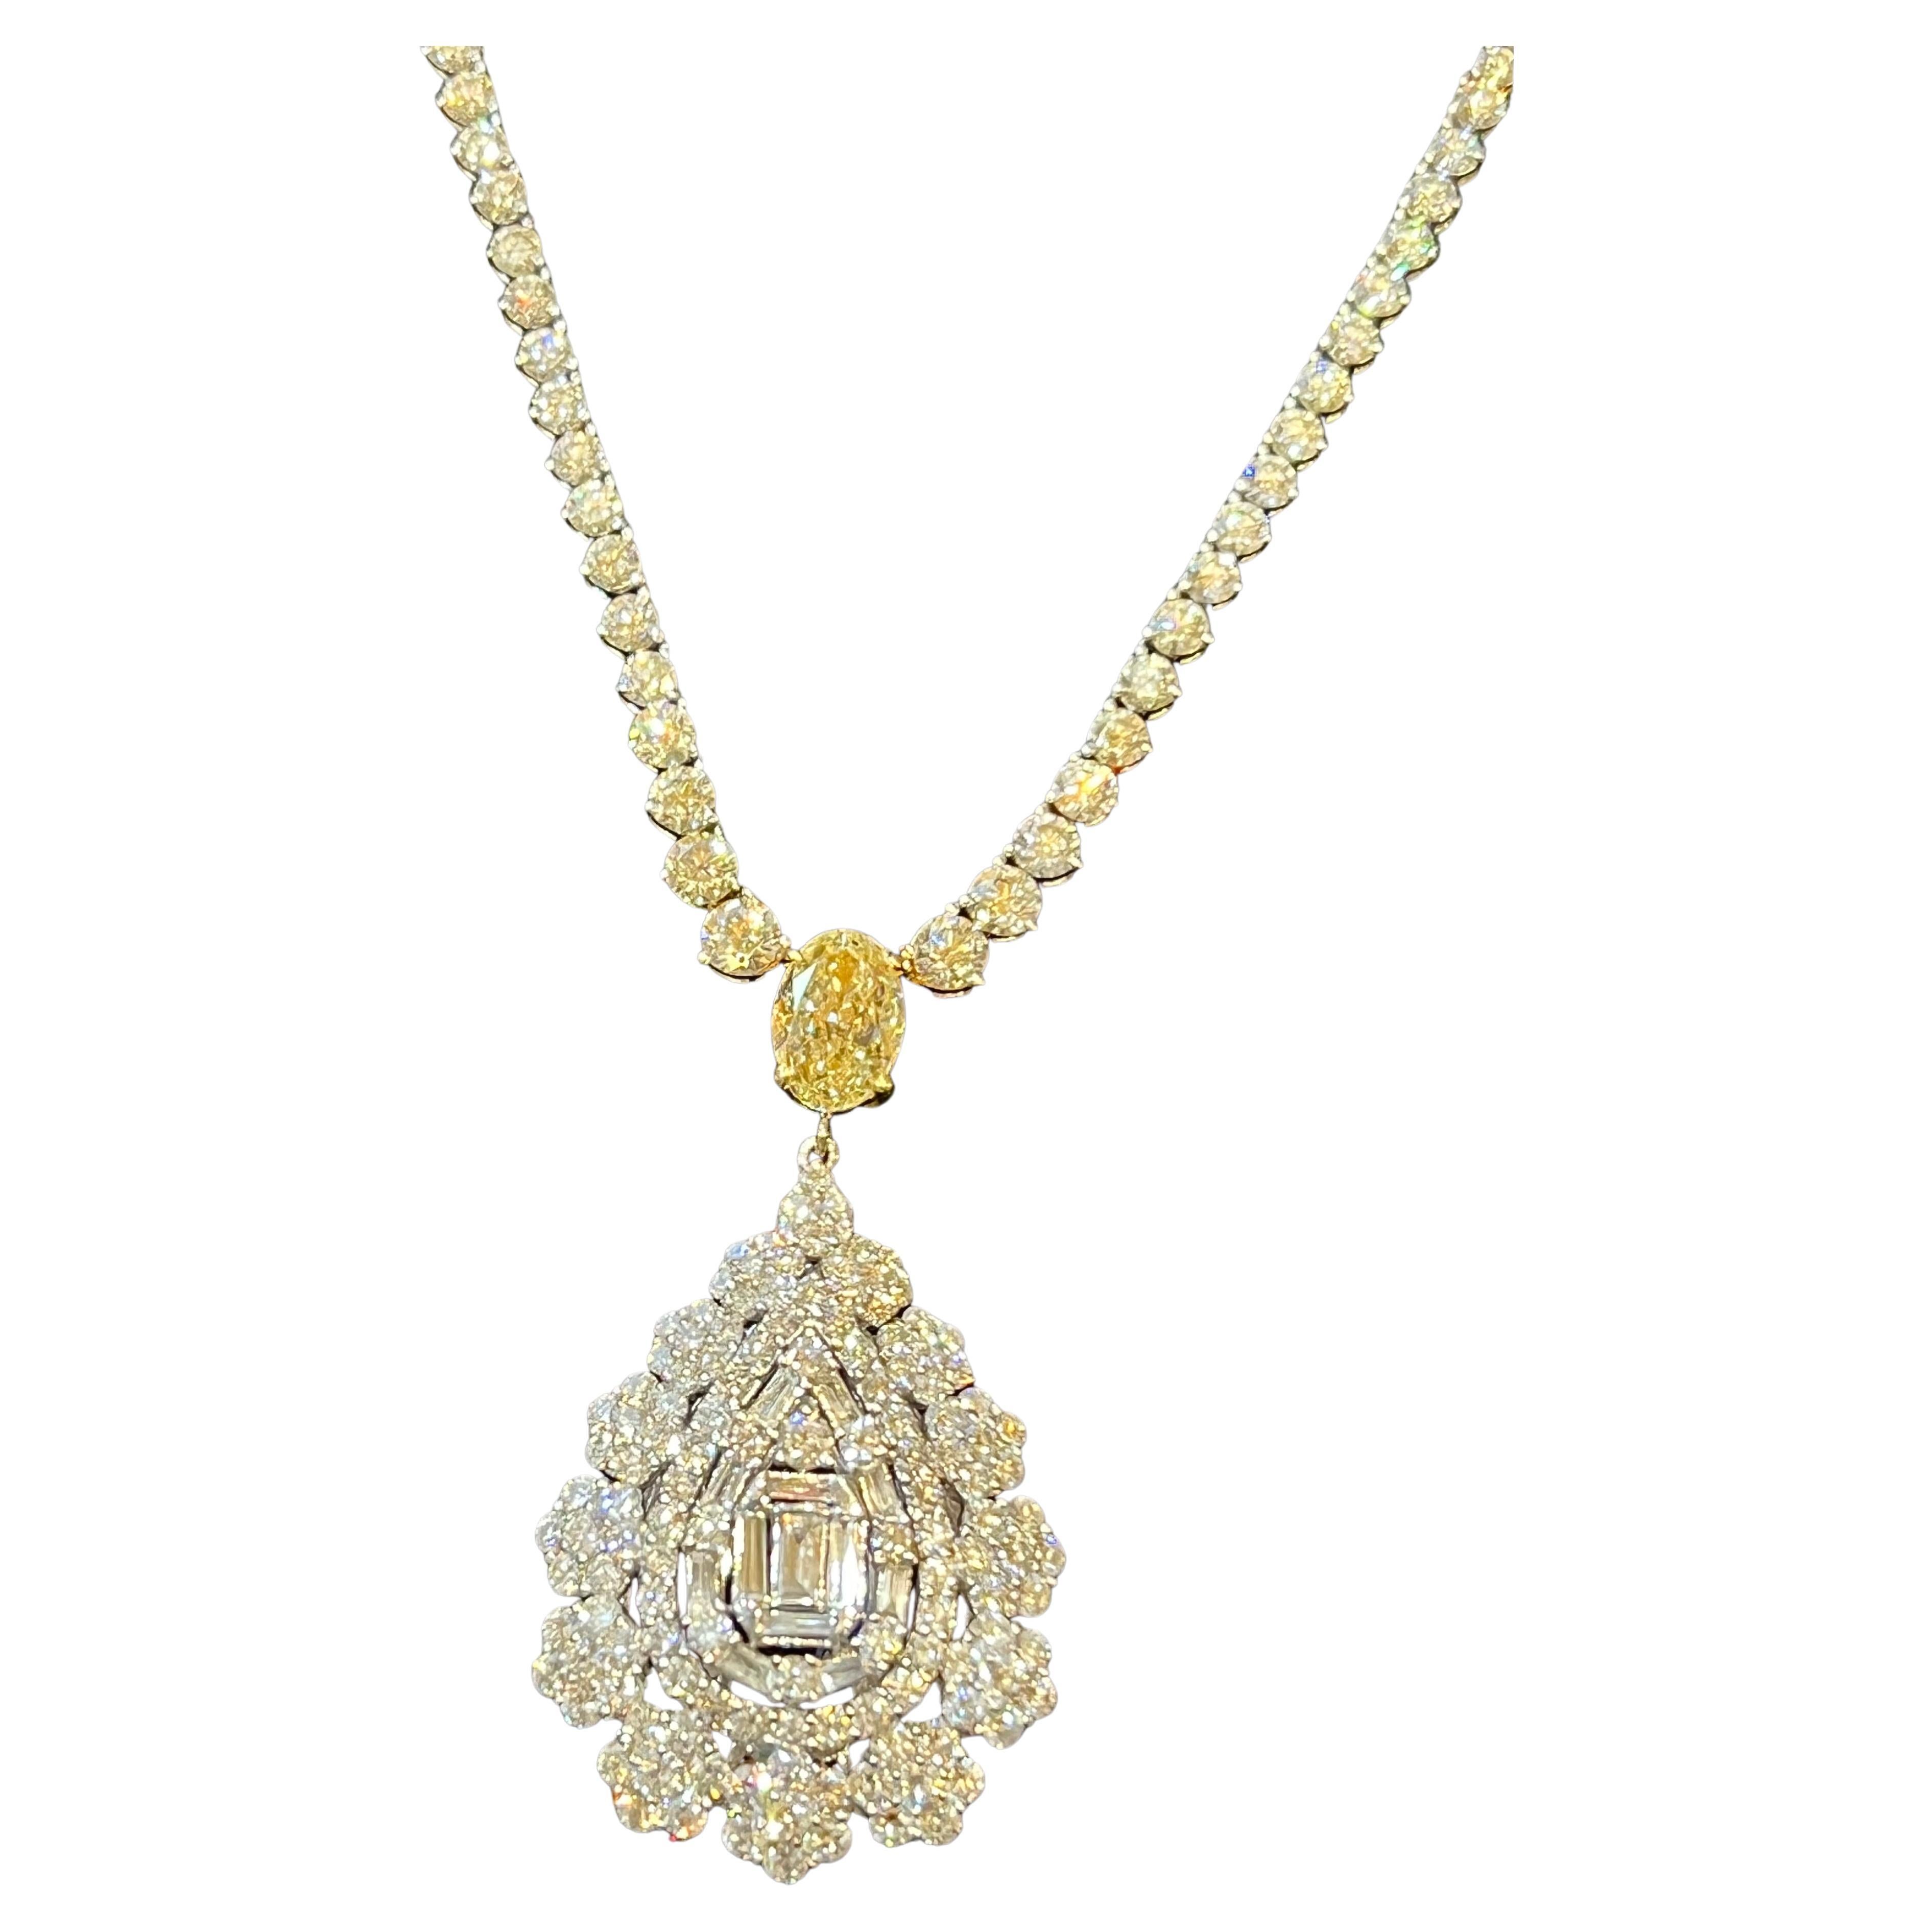 Very elegant, 18 karat white gold graduated diamond tennis necklace with diamonds that go all the way around the entire neck, features a 2.29 carat oval shaped fancy yellow diamond connected to a slightly domed pear shape cluster diamond drop. The